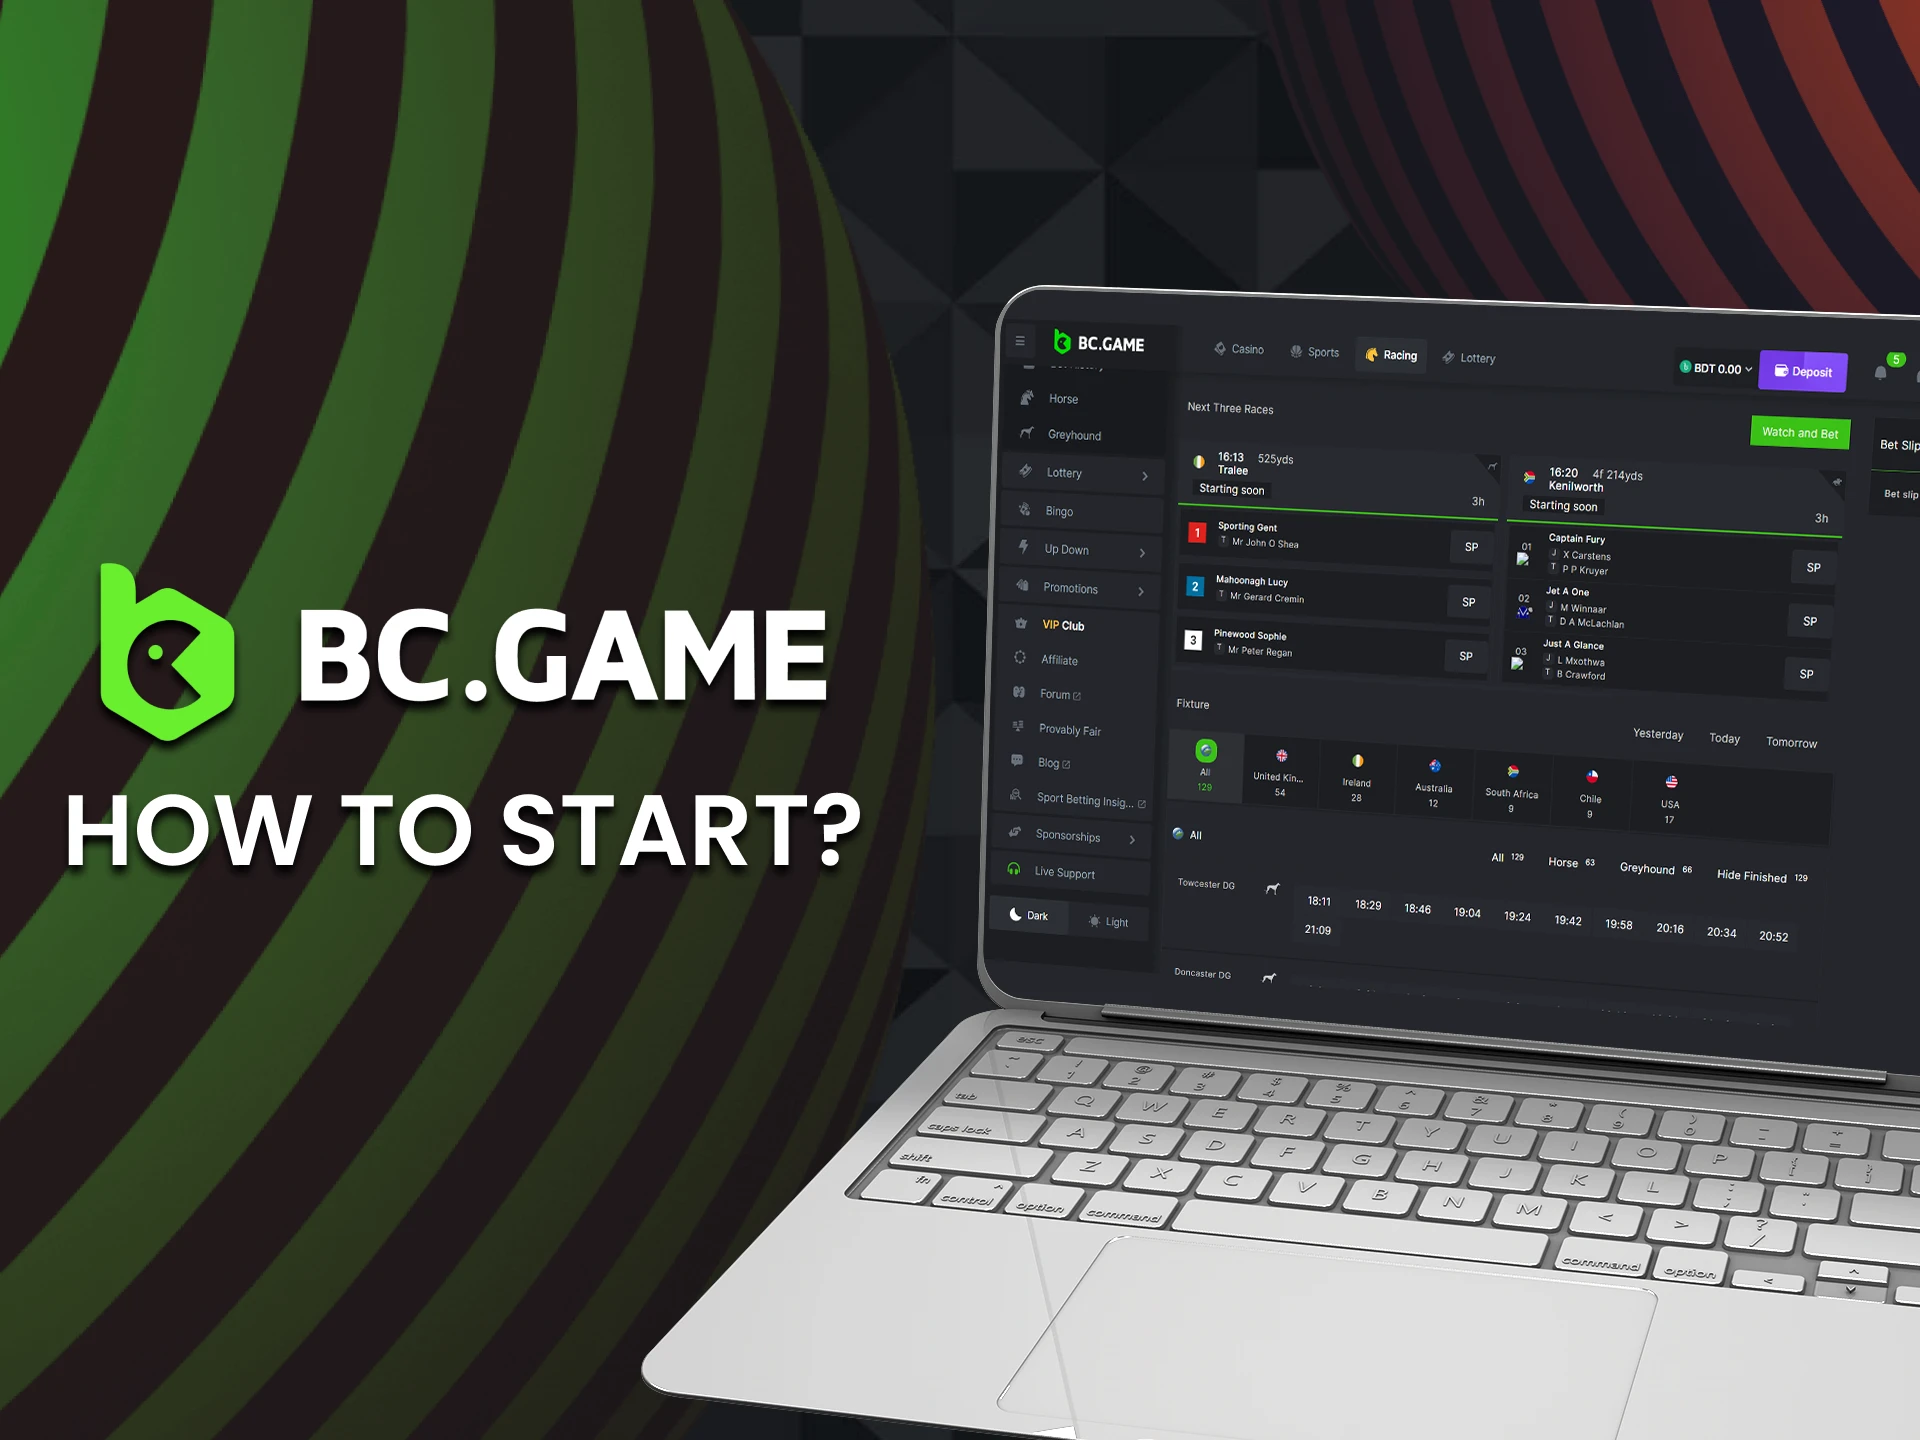 Deposit and go to the horse racing section of BC Game for betting.